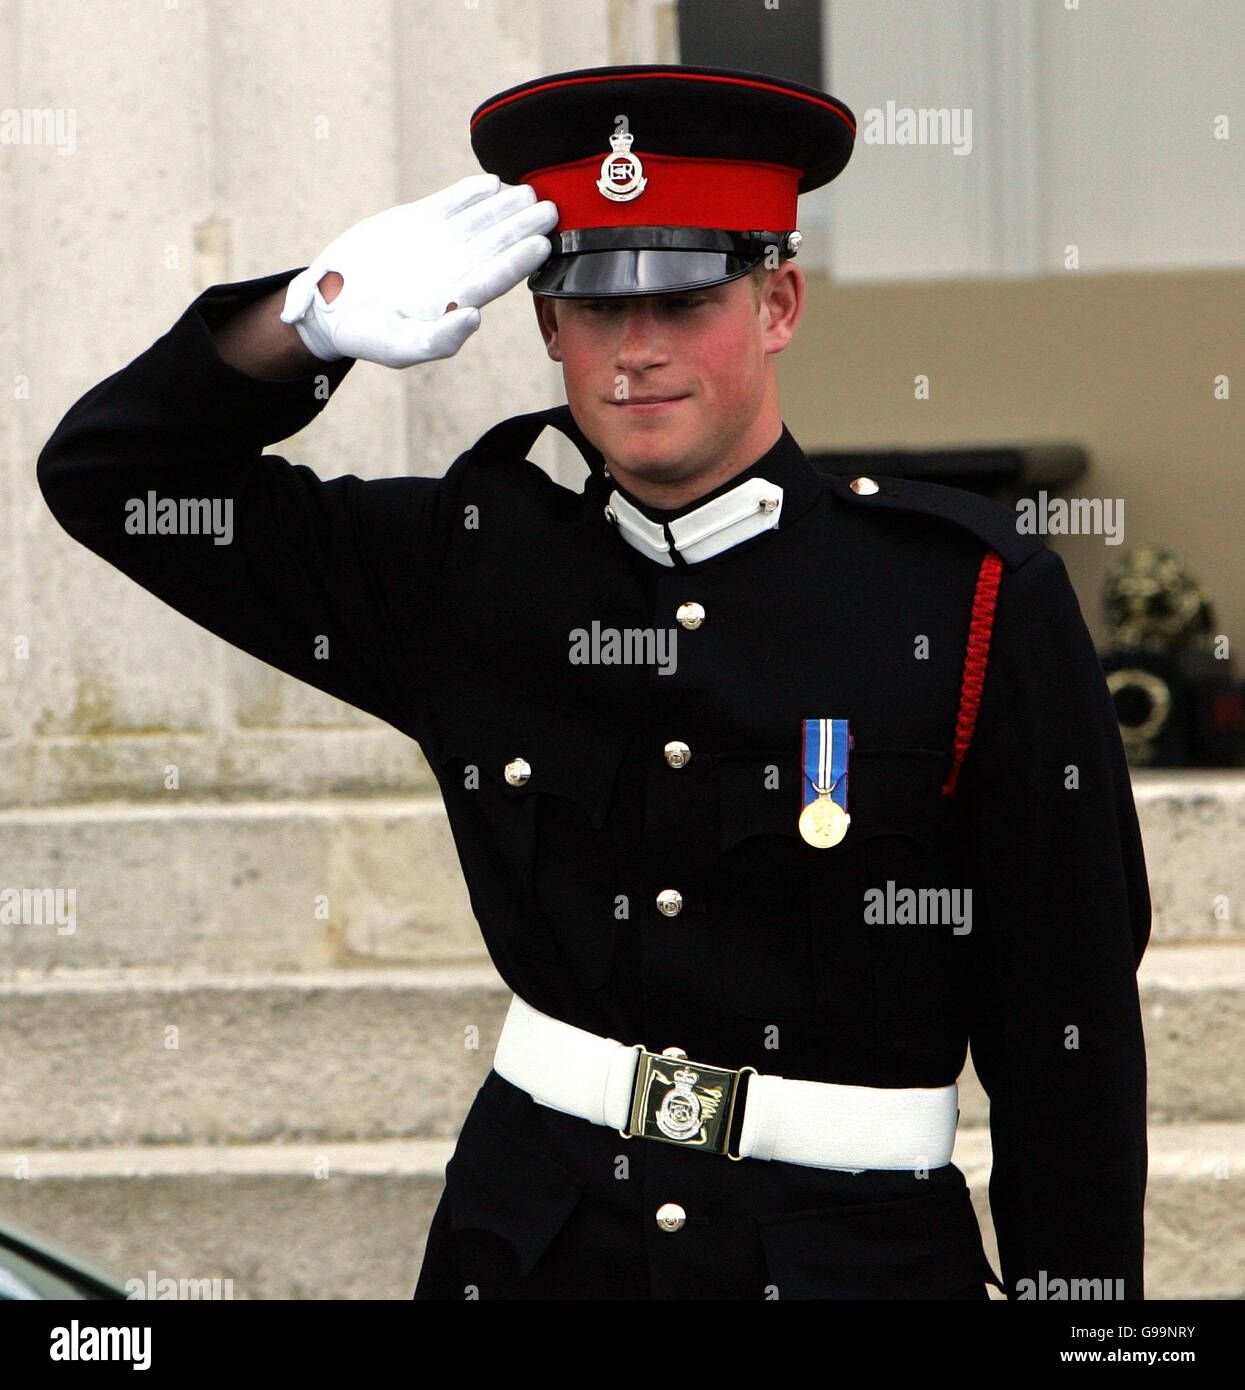 Prince Harry salutes The Prince of Wales as he leaves Sandhurst Royal Military Academy after The Sovereign's Parade that marked the completion of Prince Harry's Officer training. PRESS ASSOCIATION Photo Picture date: Wednesday April 12, 2006. The Prince was one of 220 cadets passing out and receiving their commissions into the British Army. See PA story ROYAL Harry. Photo credit should read: Tim Ockenden / PA. Stock Photo